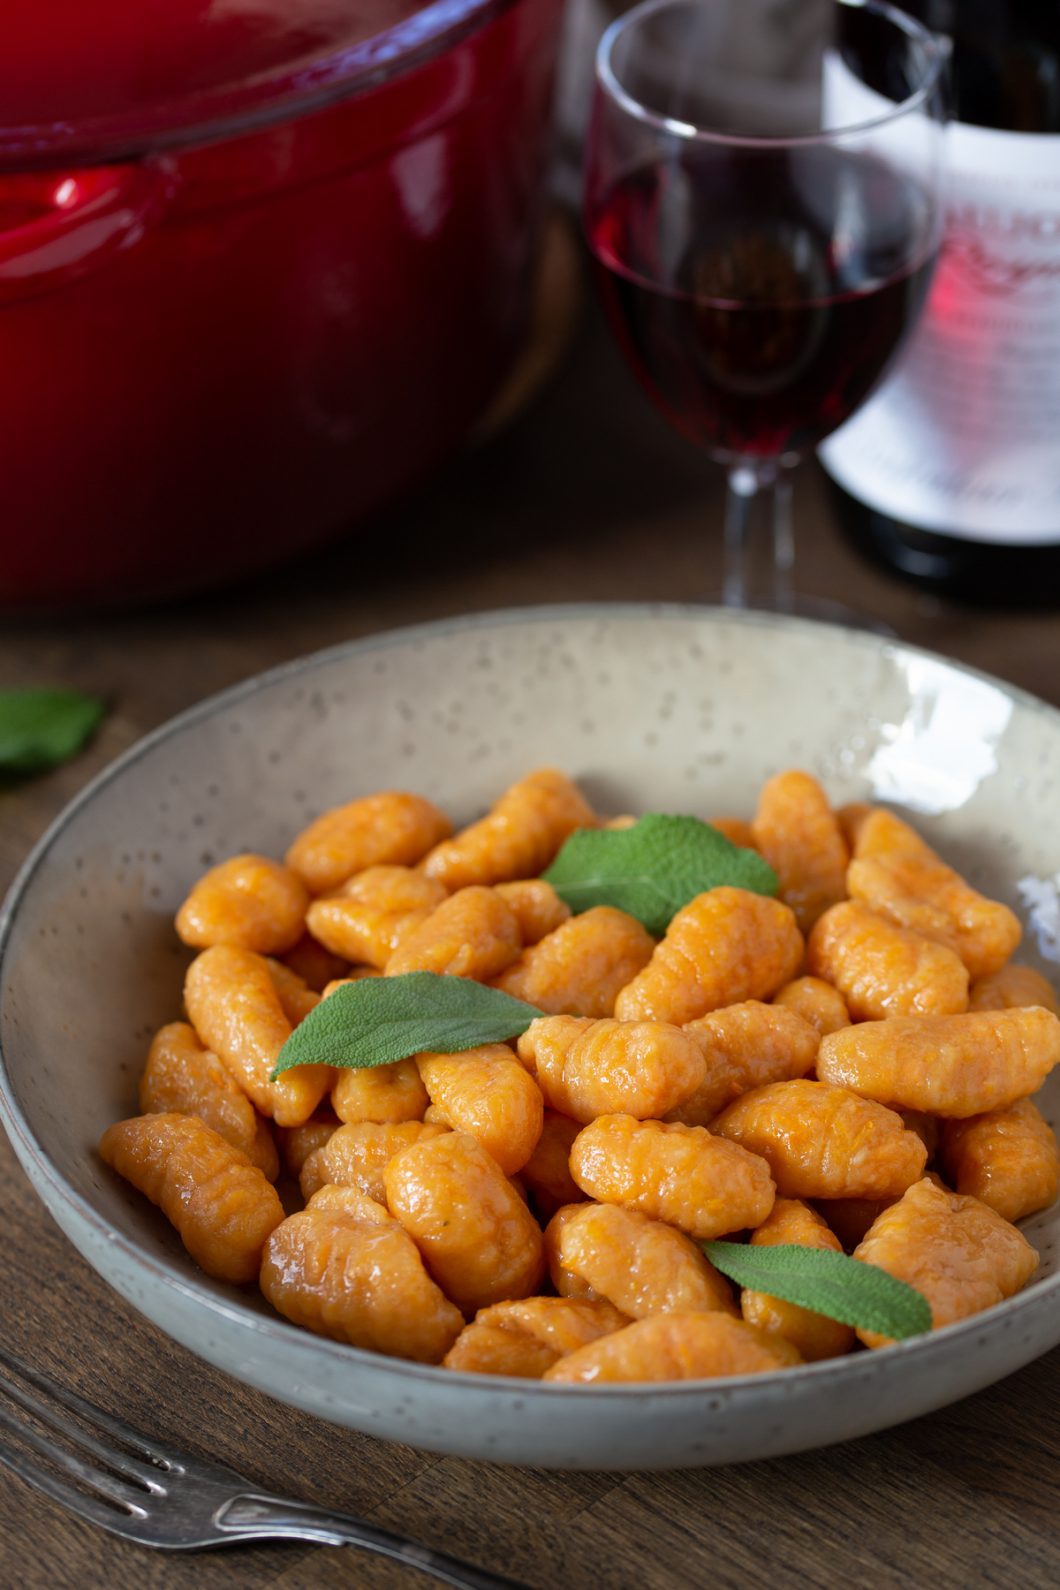 Roasted sweet potato gnocchi served with brown butter and fresh sage.